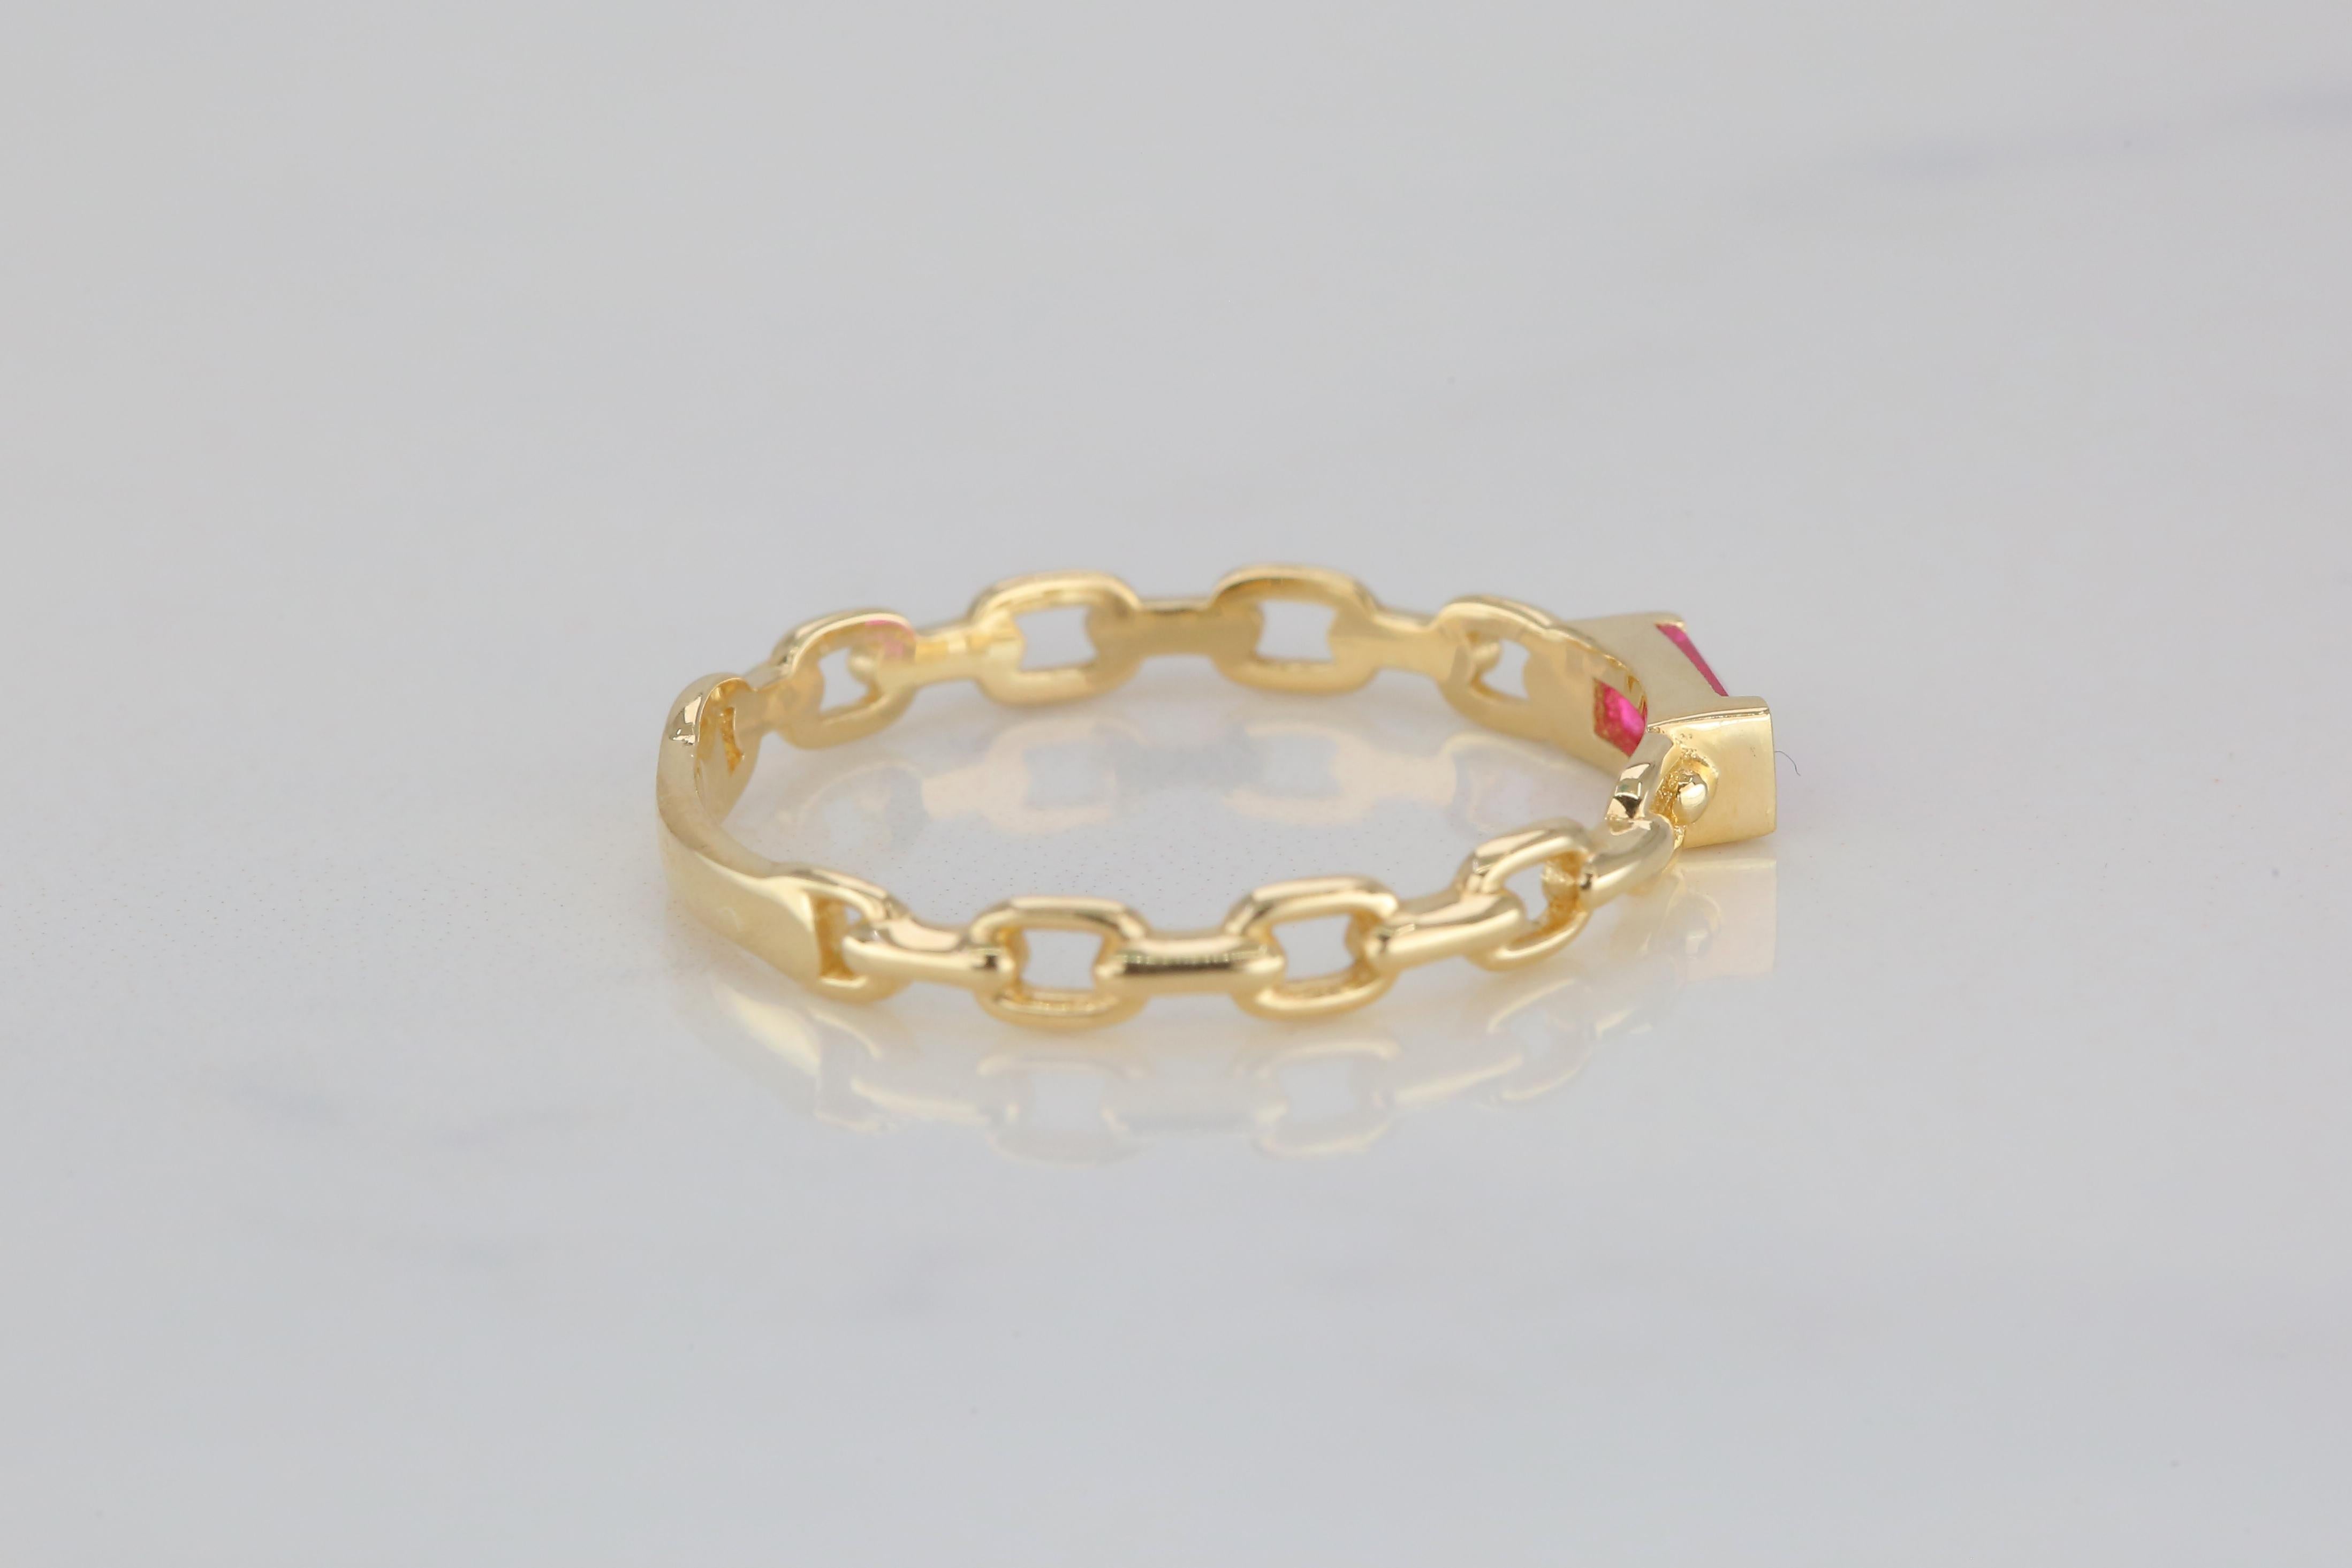 For Sale:  14 K Solid Gold Chain Link Ring -with Pink Quartz, Modern Minimal Ring 4